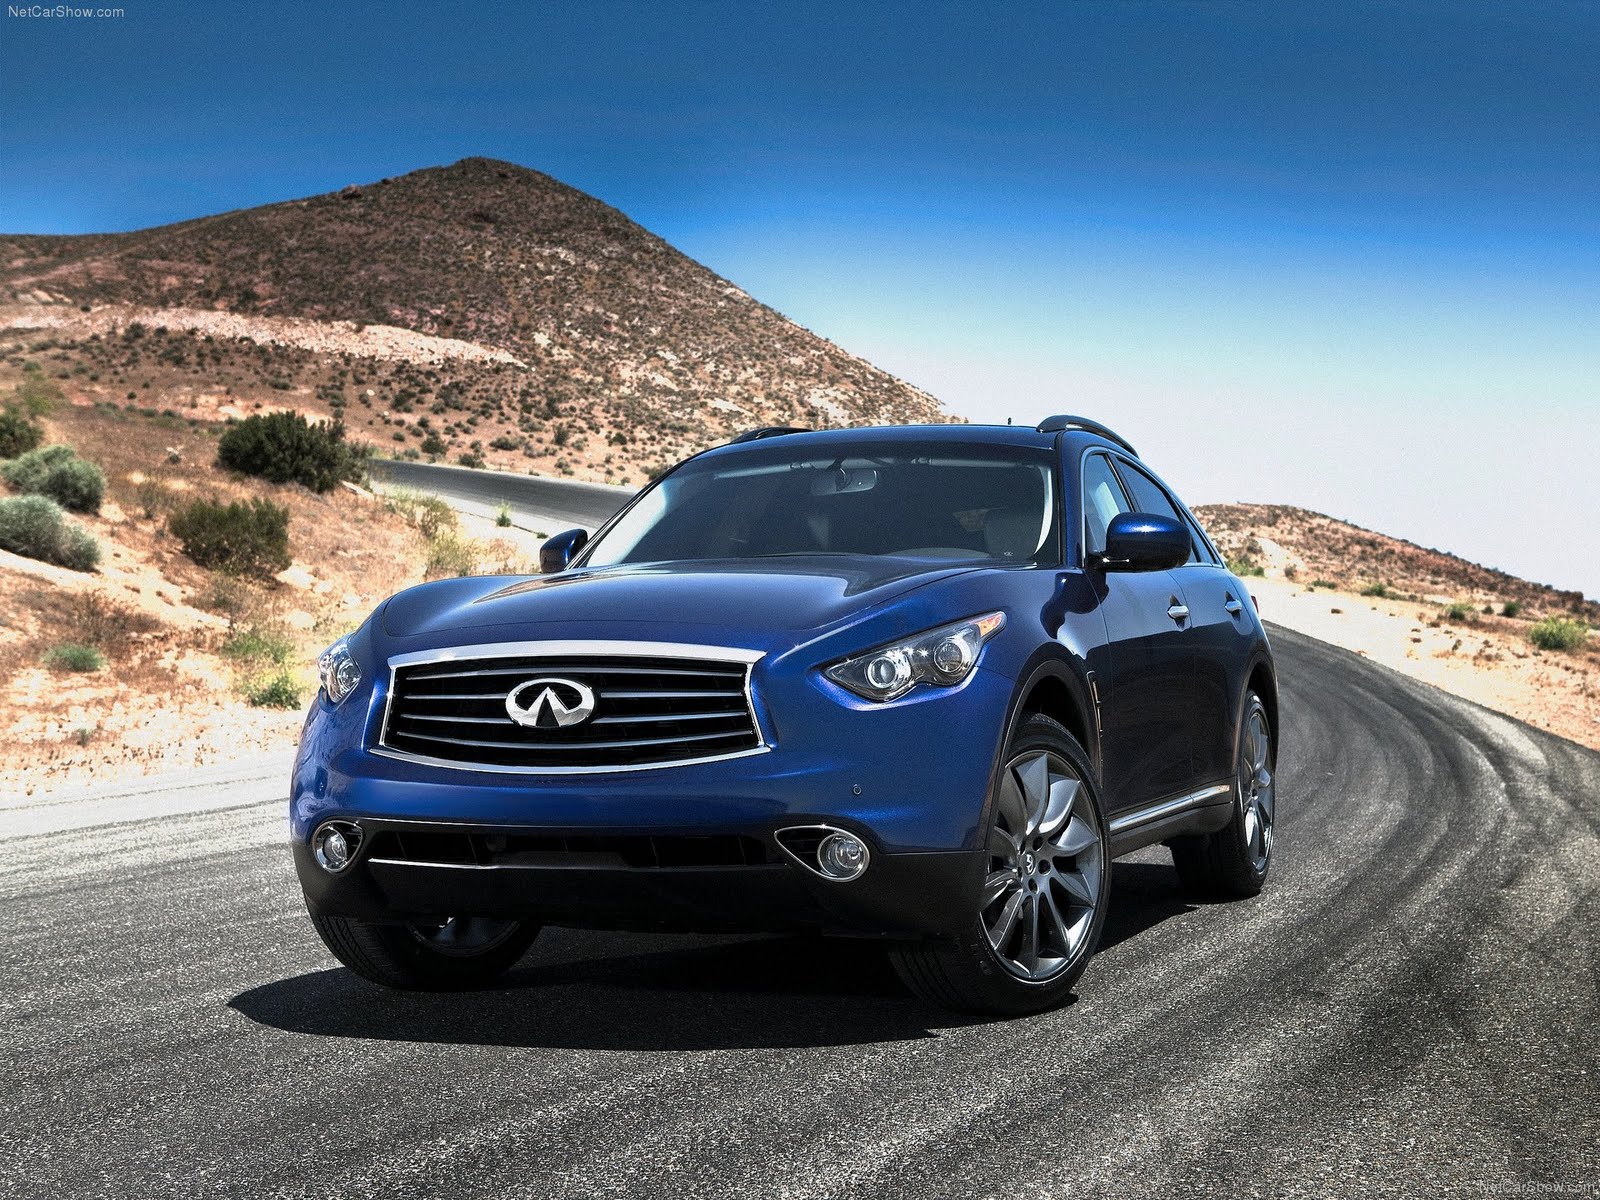 New 2012 Infiniti FX35 NEW CARUSED CAR REVIEWS PICTURE